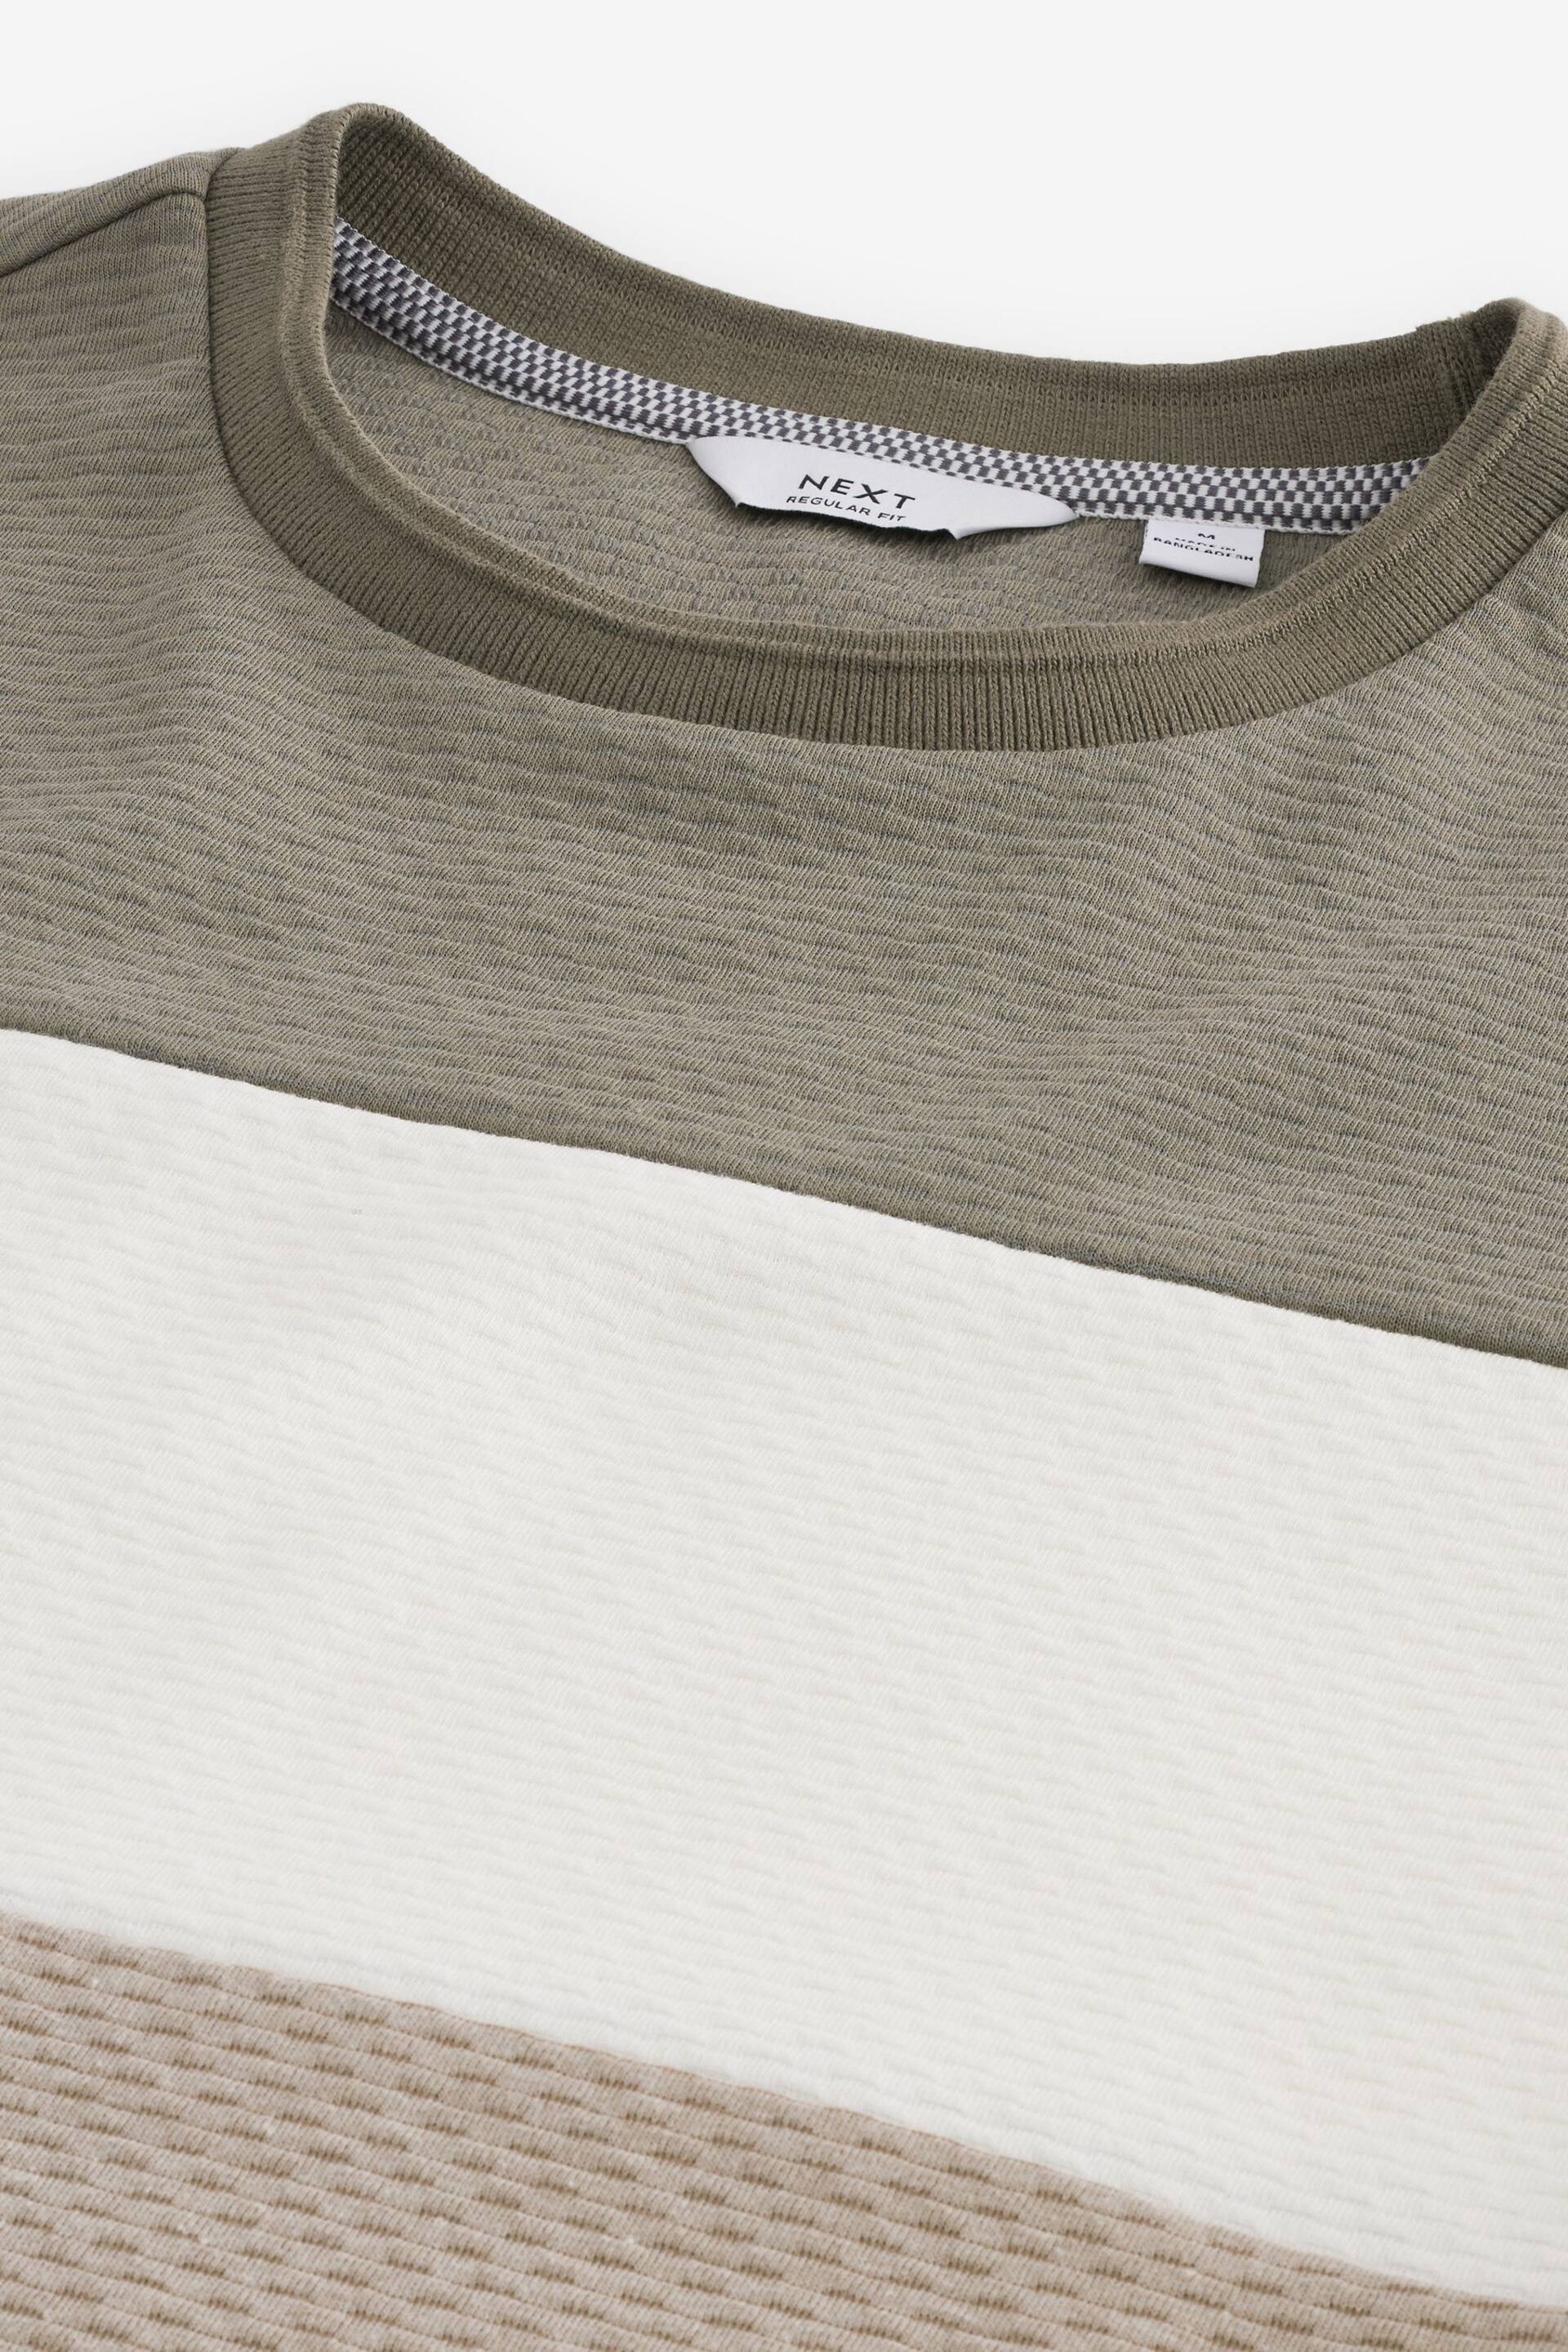 Neutral Textured Colour Block T-Shirt - Image 7 of 8